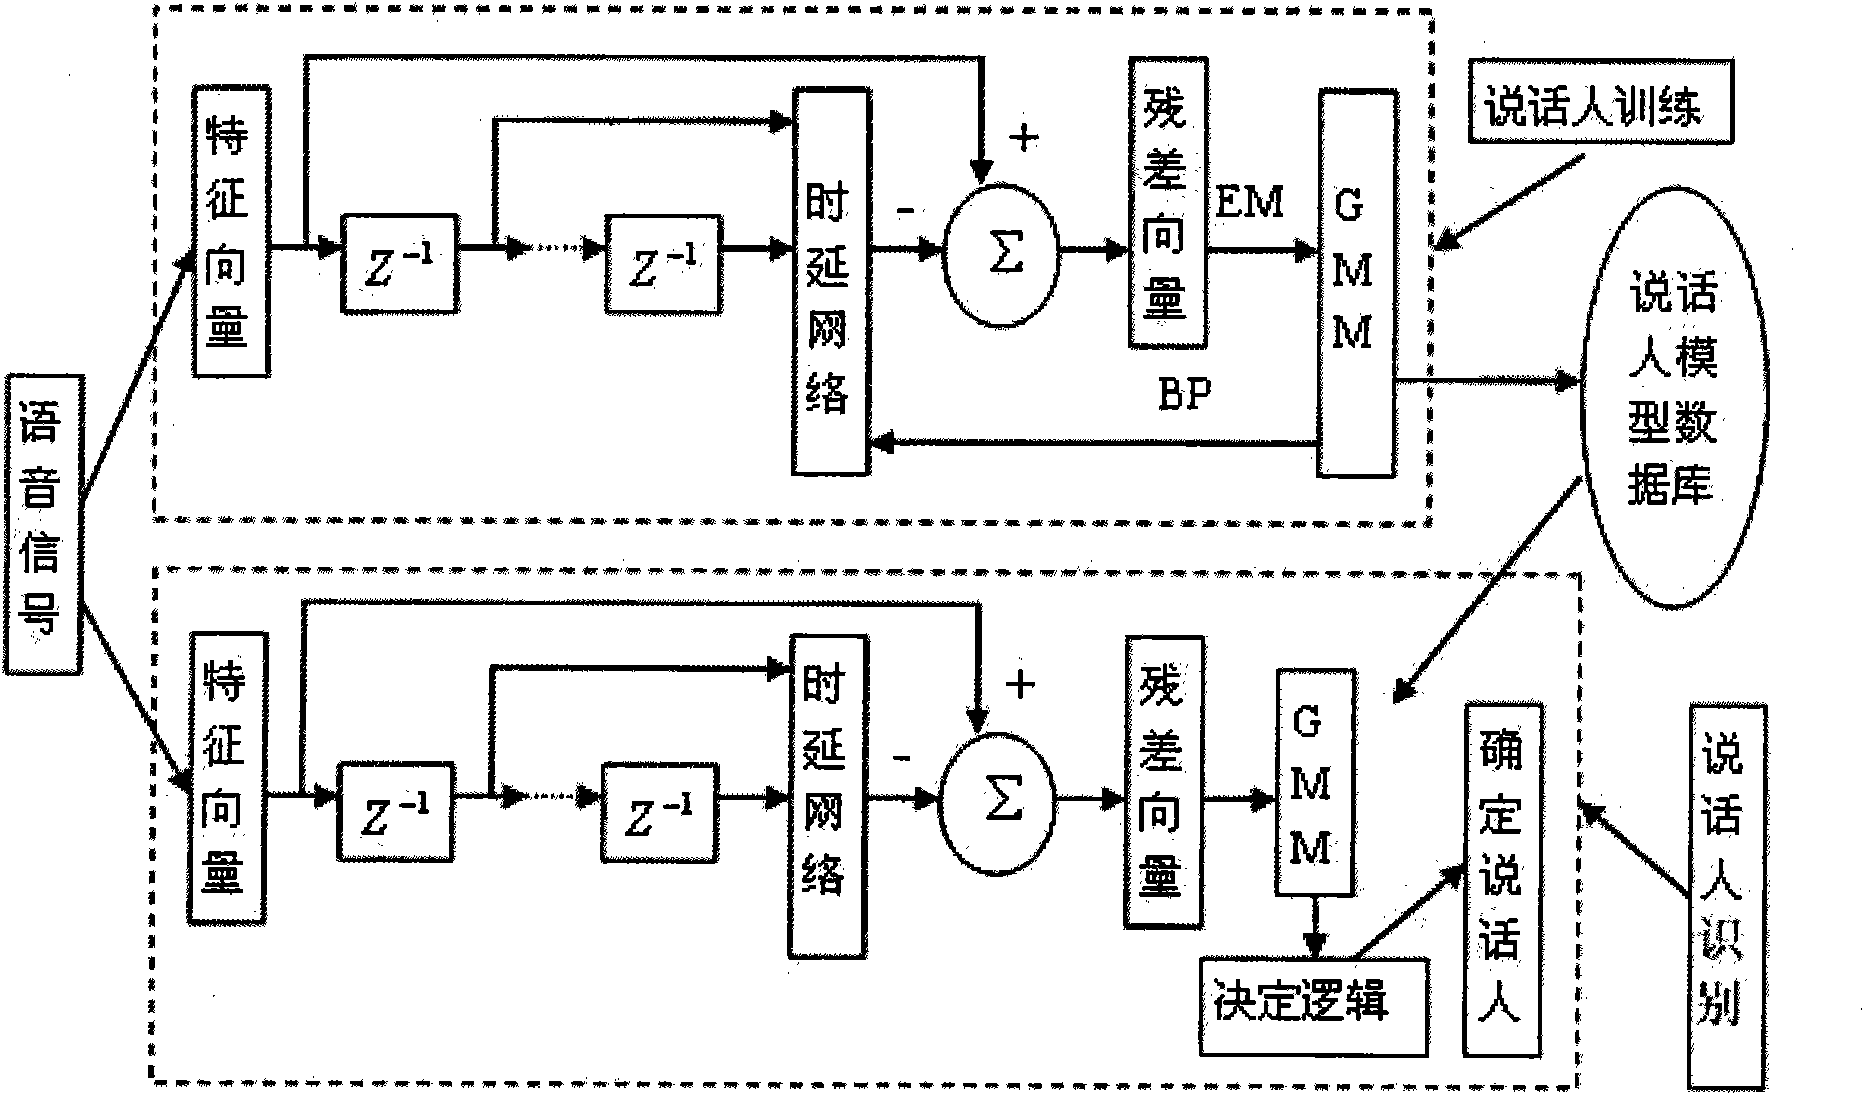 Speaker recognition method based on Gaussian mixture model embedded with time delay neural network